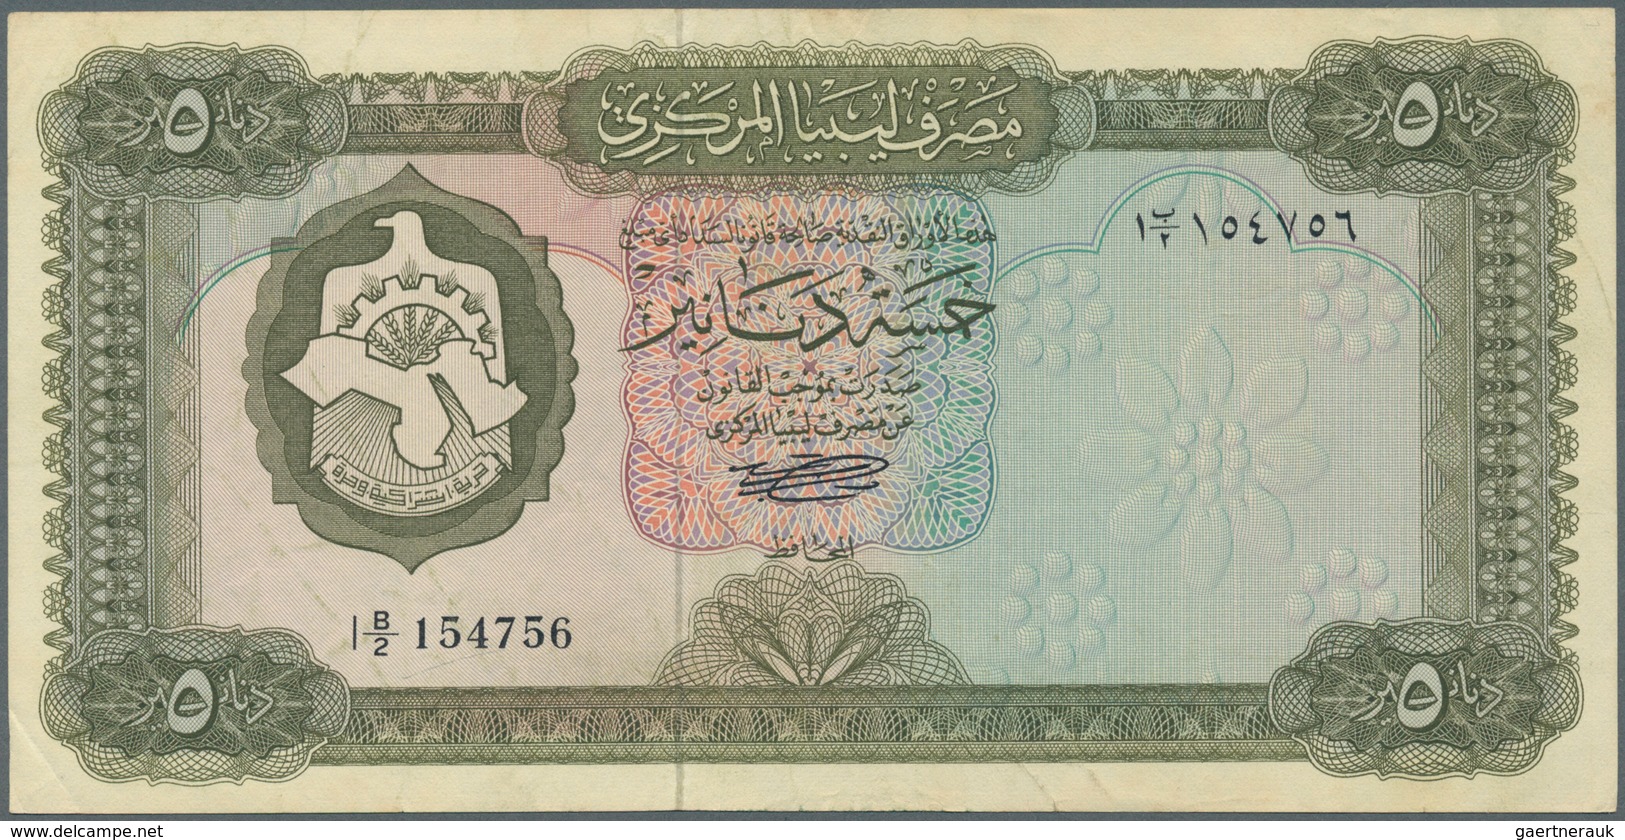 Libya / Libyen: 5 Dinars ND(1971) Without Inscription At Lower Right On Front, P.36a, Still Strong P - Libye